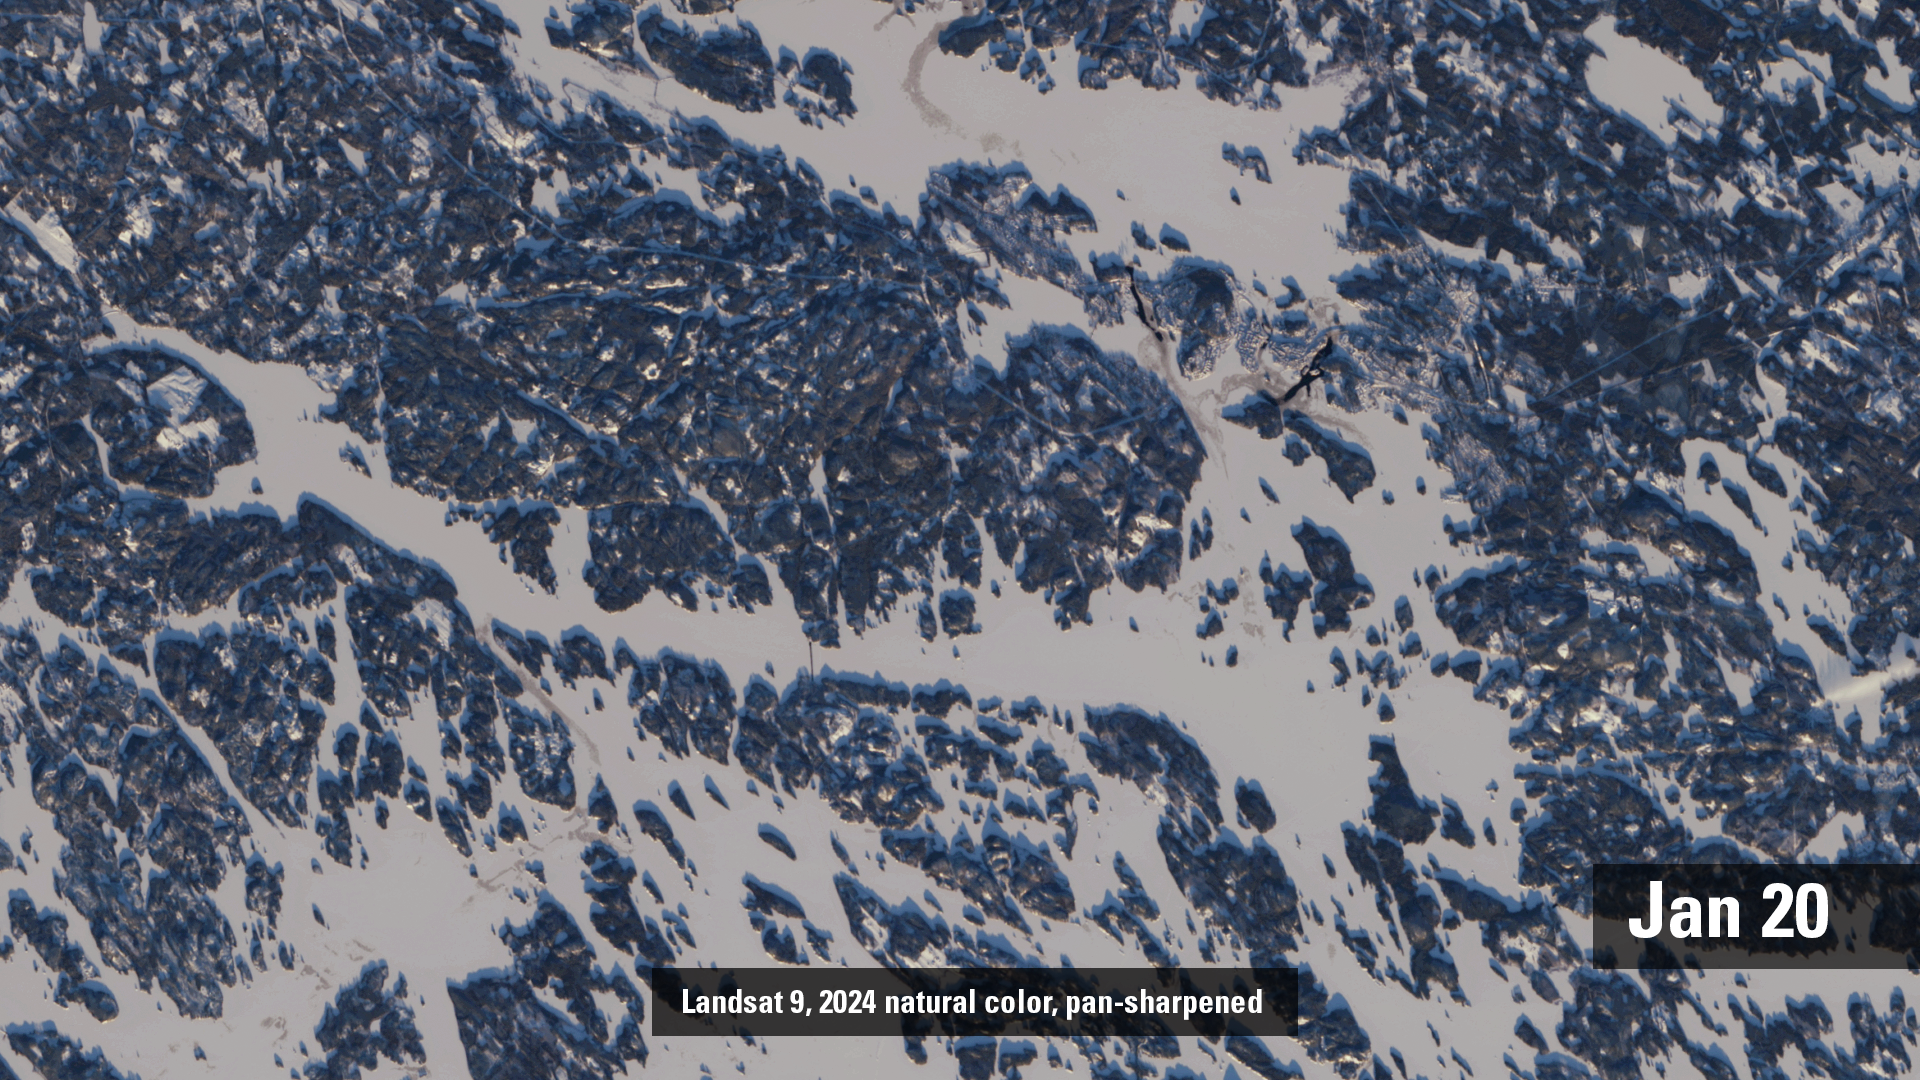 Ice Routes in Finland Revealed by Landsat after